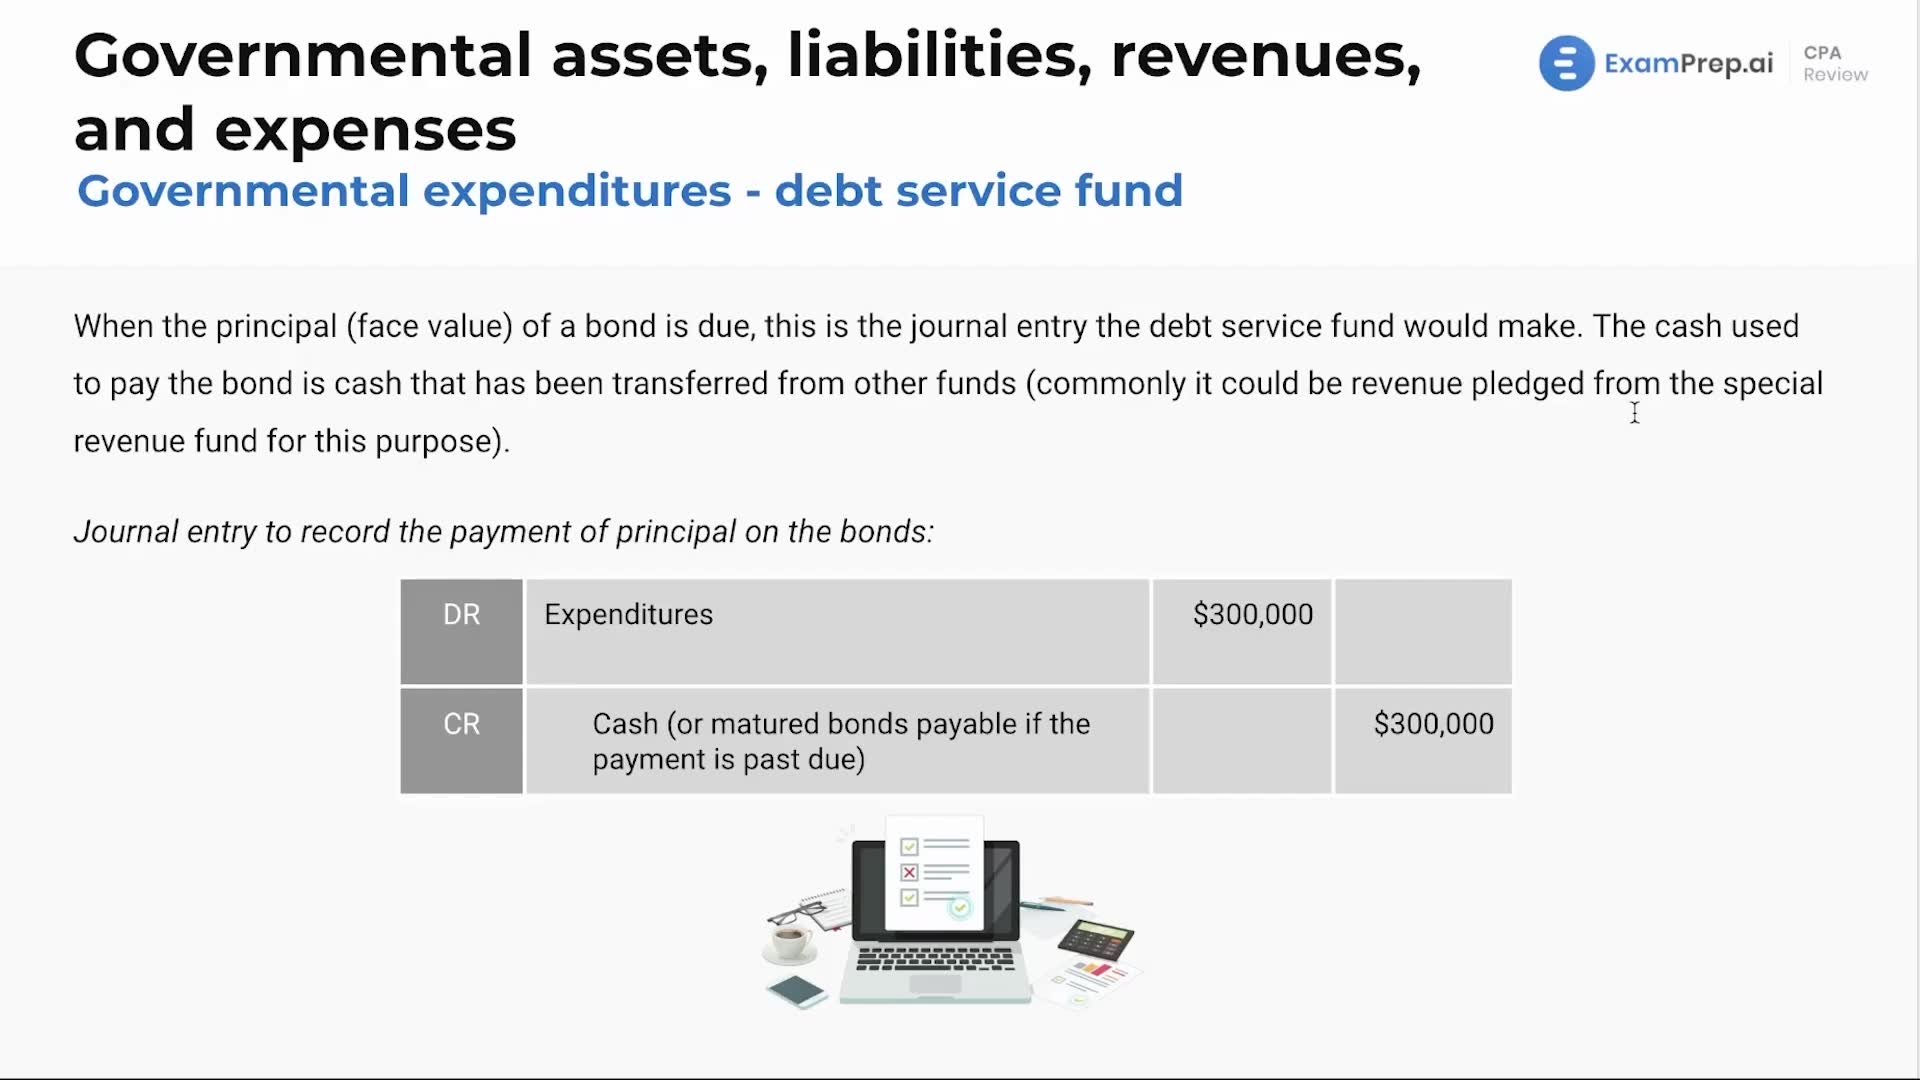 Governmental Expenditures - Debt Service Fund lesson thumbnail